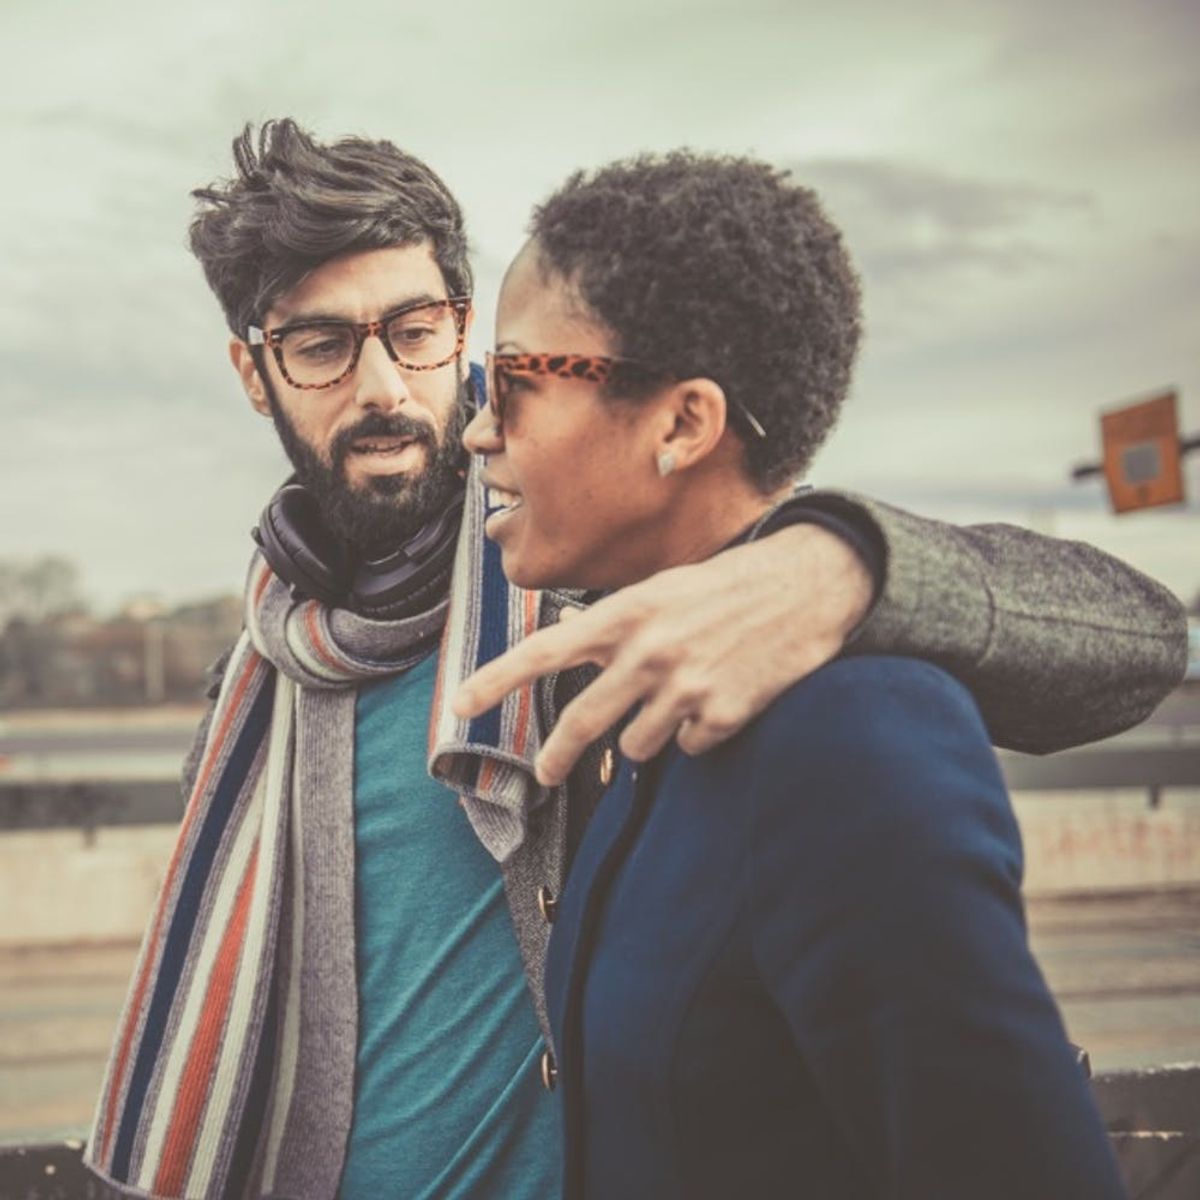 These 4 Factors Can Predict Long-Term Romantic Compatibility